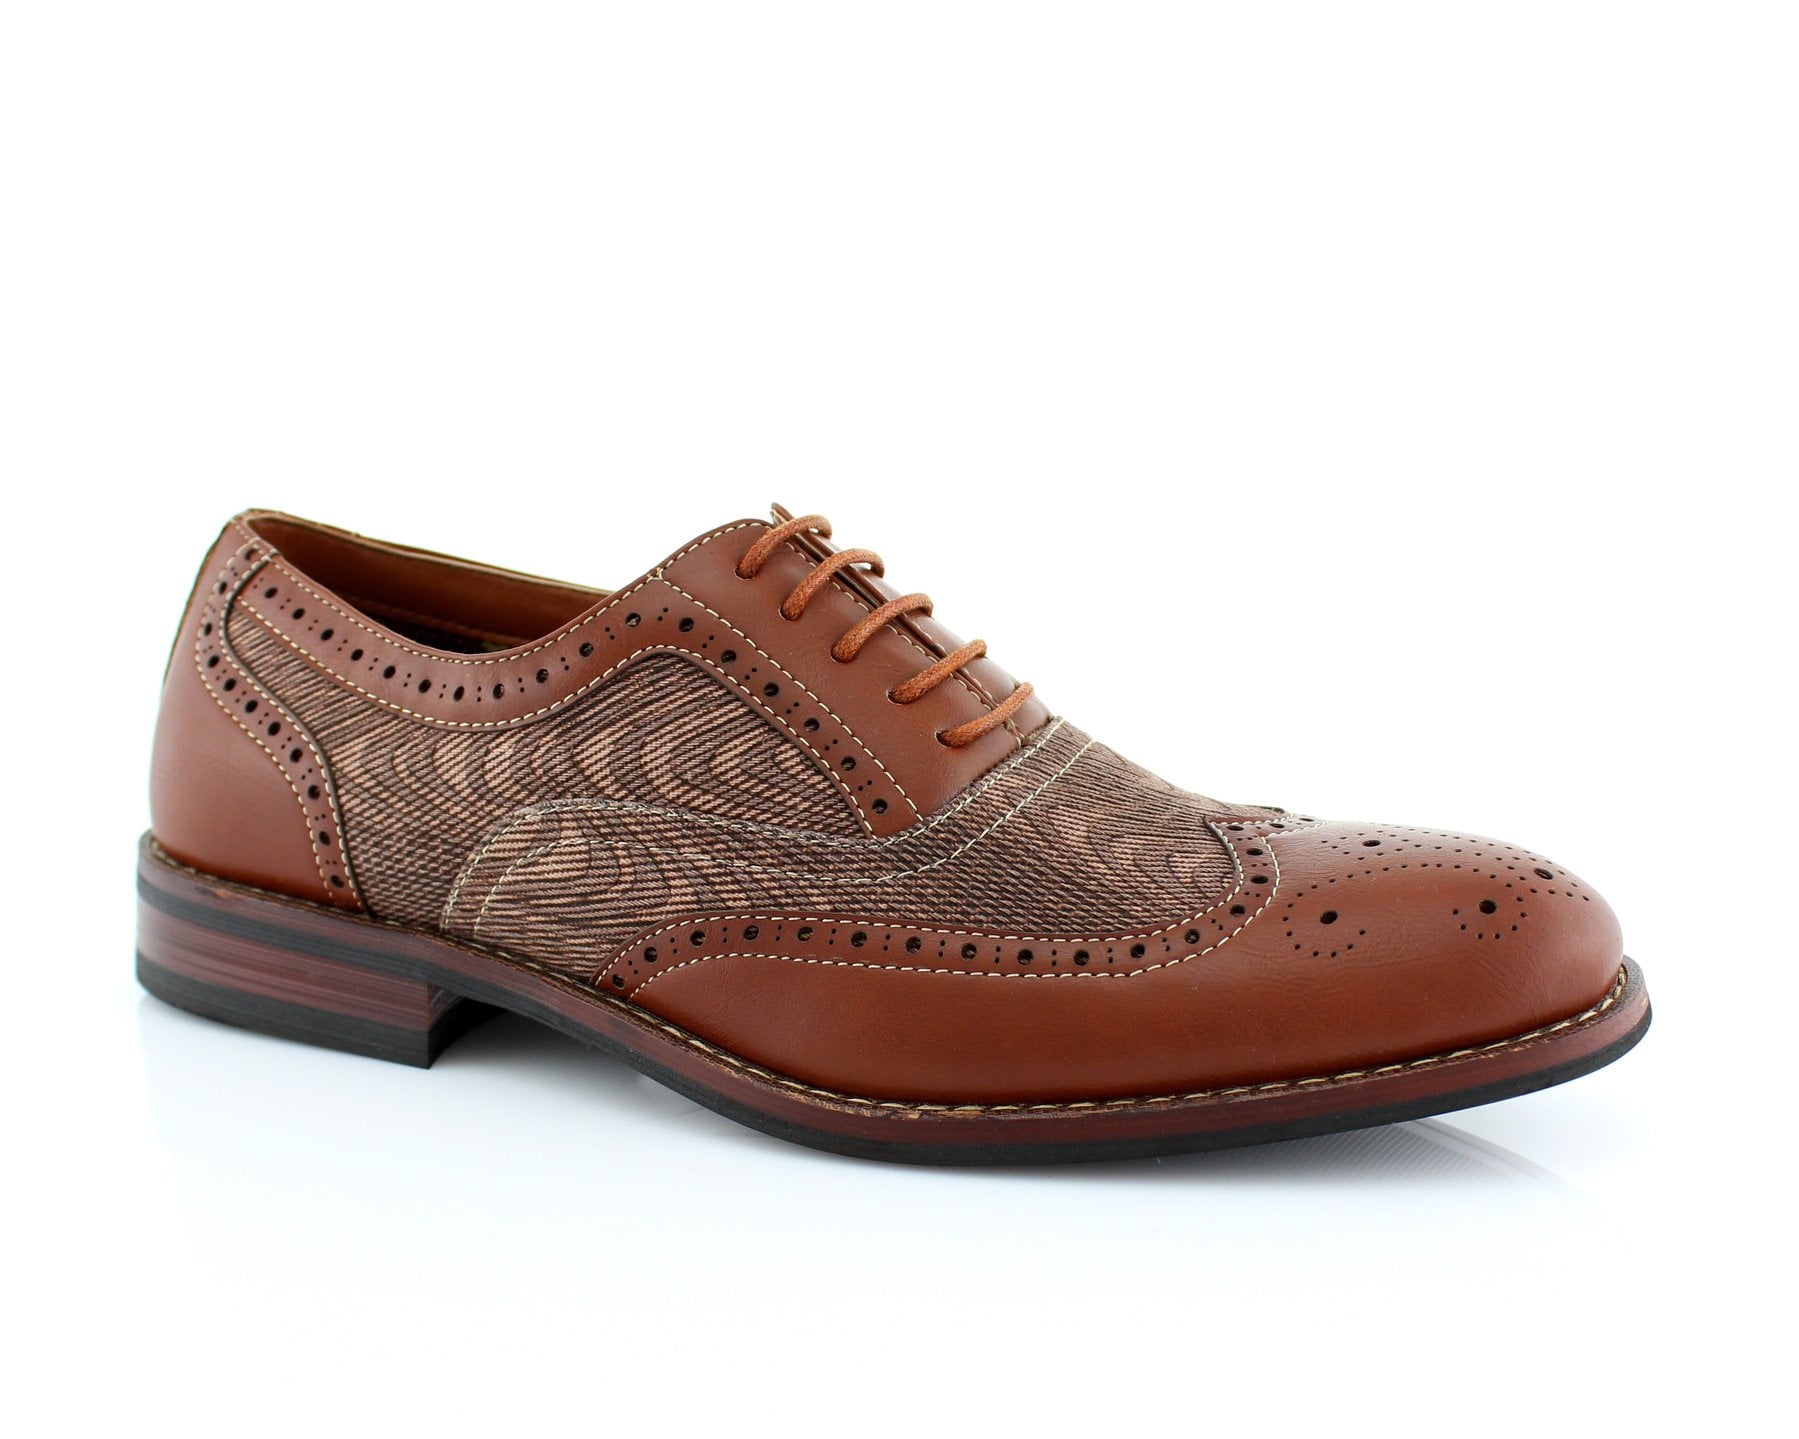 Men's Wing Tip Perforated Lace Up Fashion Oxford Dress Shoes 